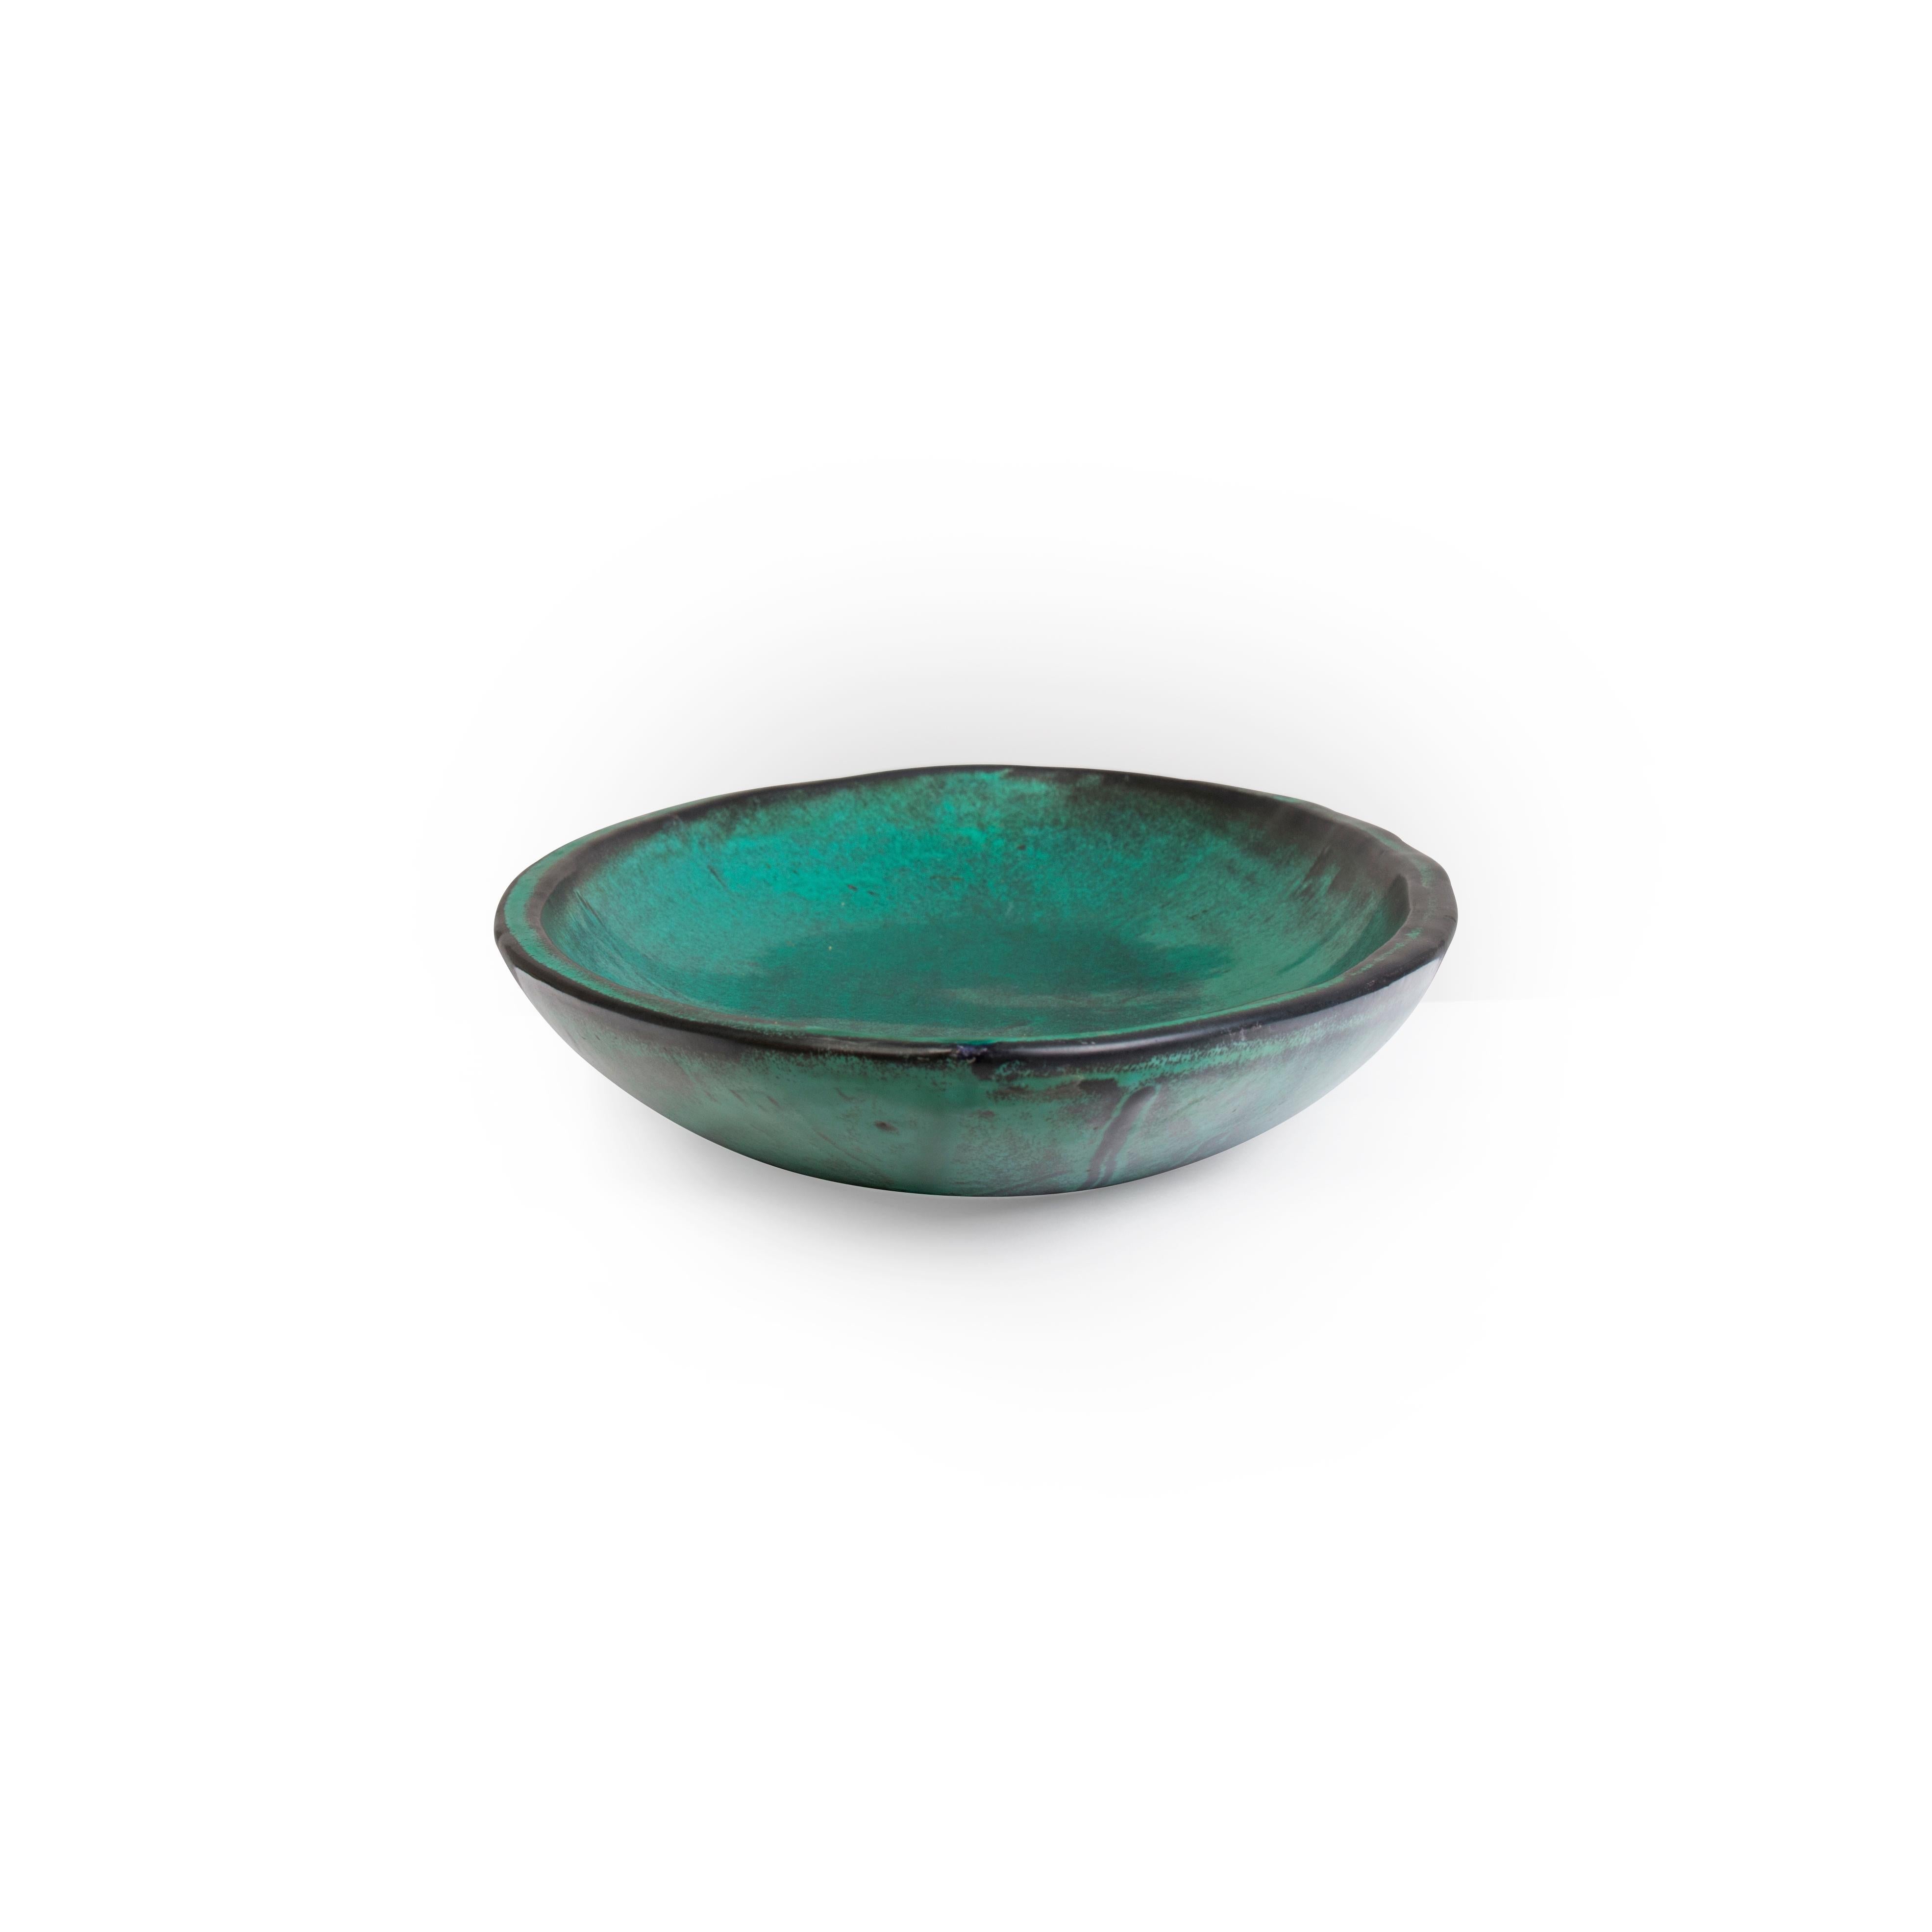 Glazed Danish black and turquoise green elliptical shaped dish plate For Sale